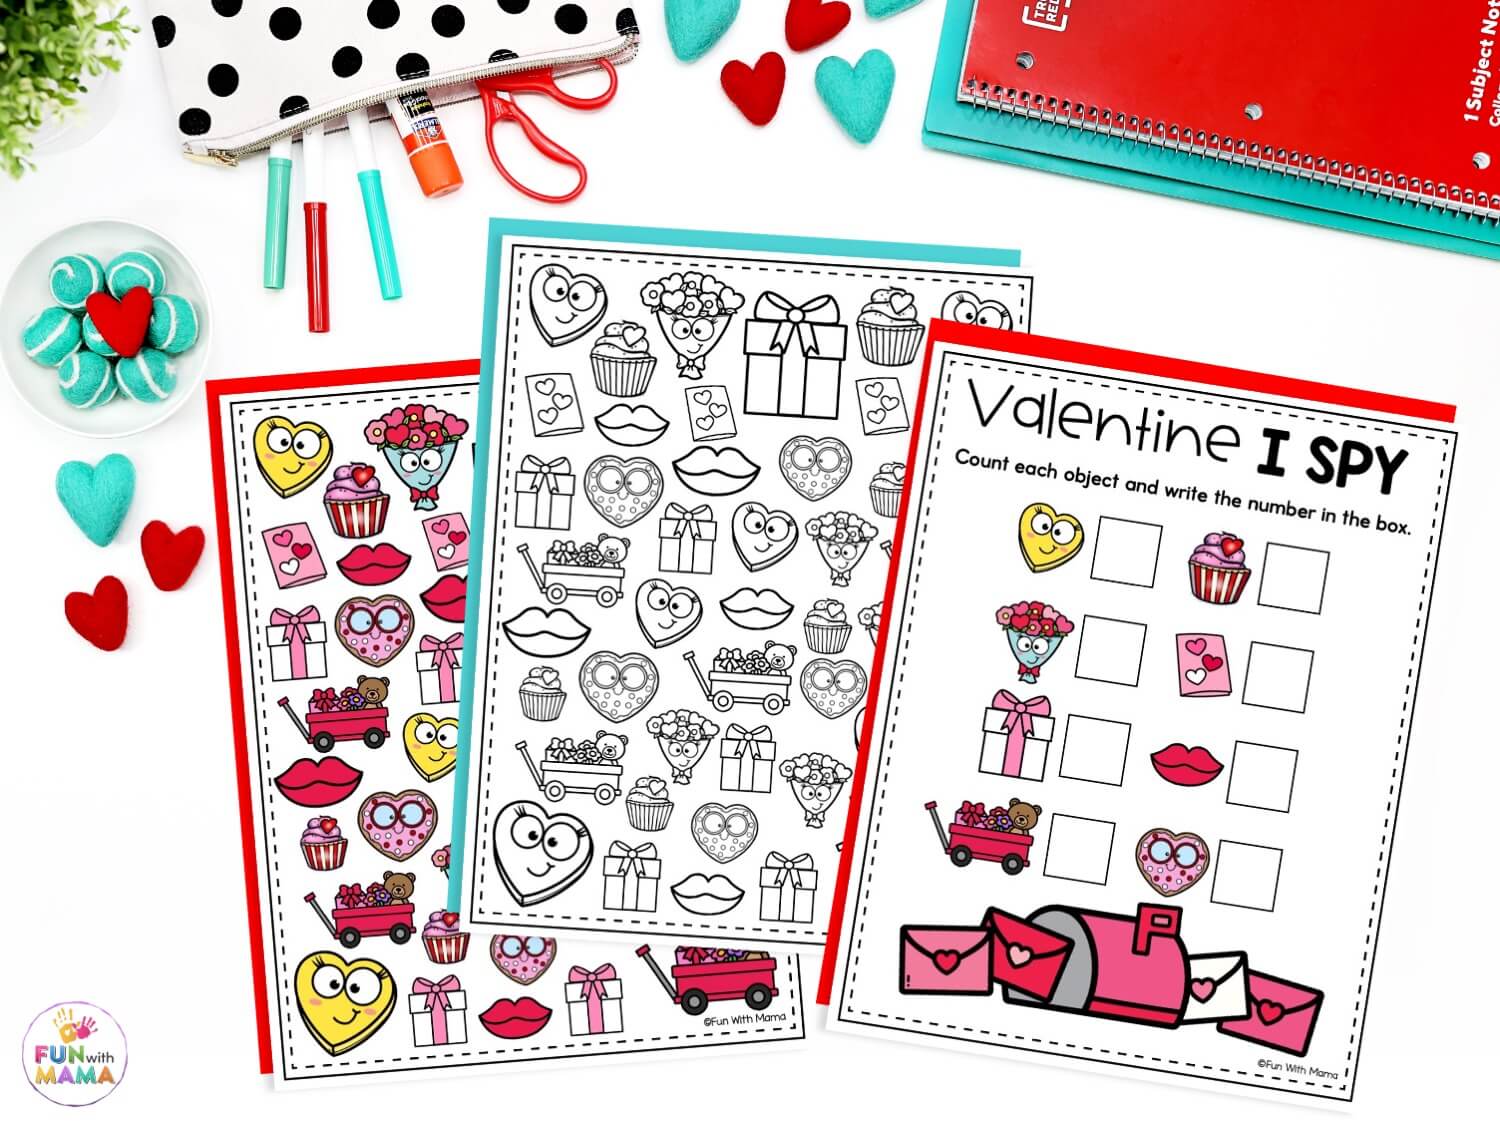 easy valentine's day i spy game for preschoolers